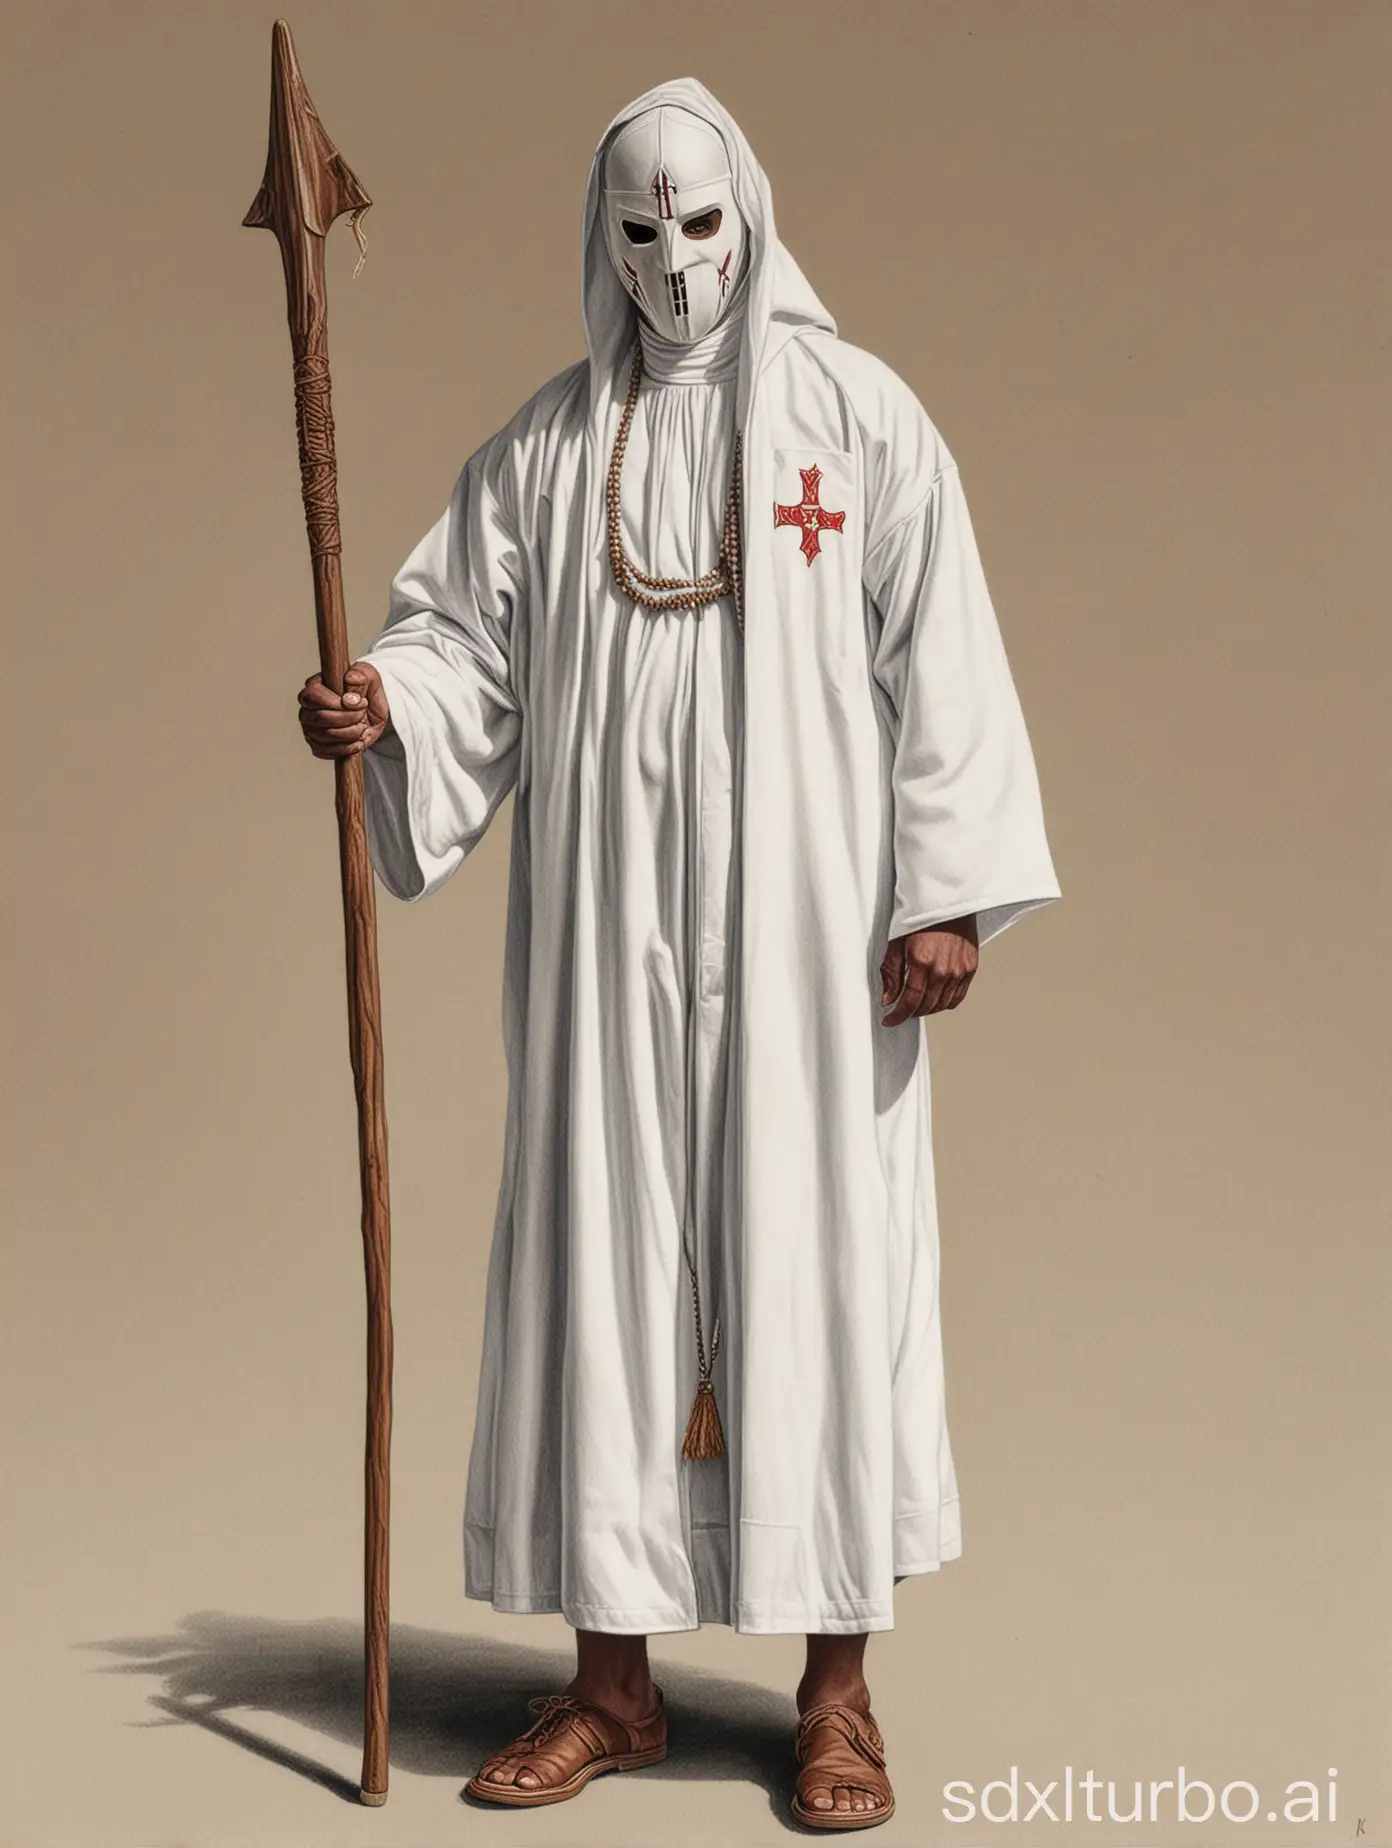 Colored pencil drawing, it depicts a Ku Klux Klan member dressed in a white robe and with a mask, full body